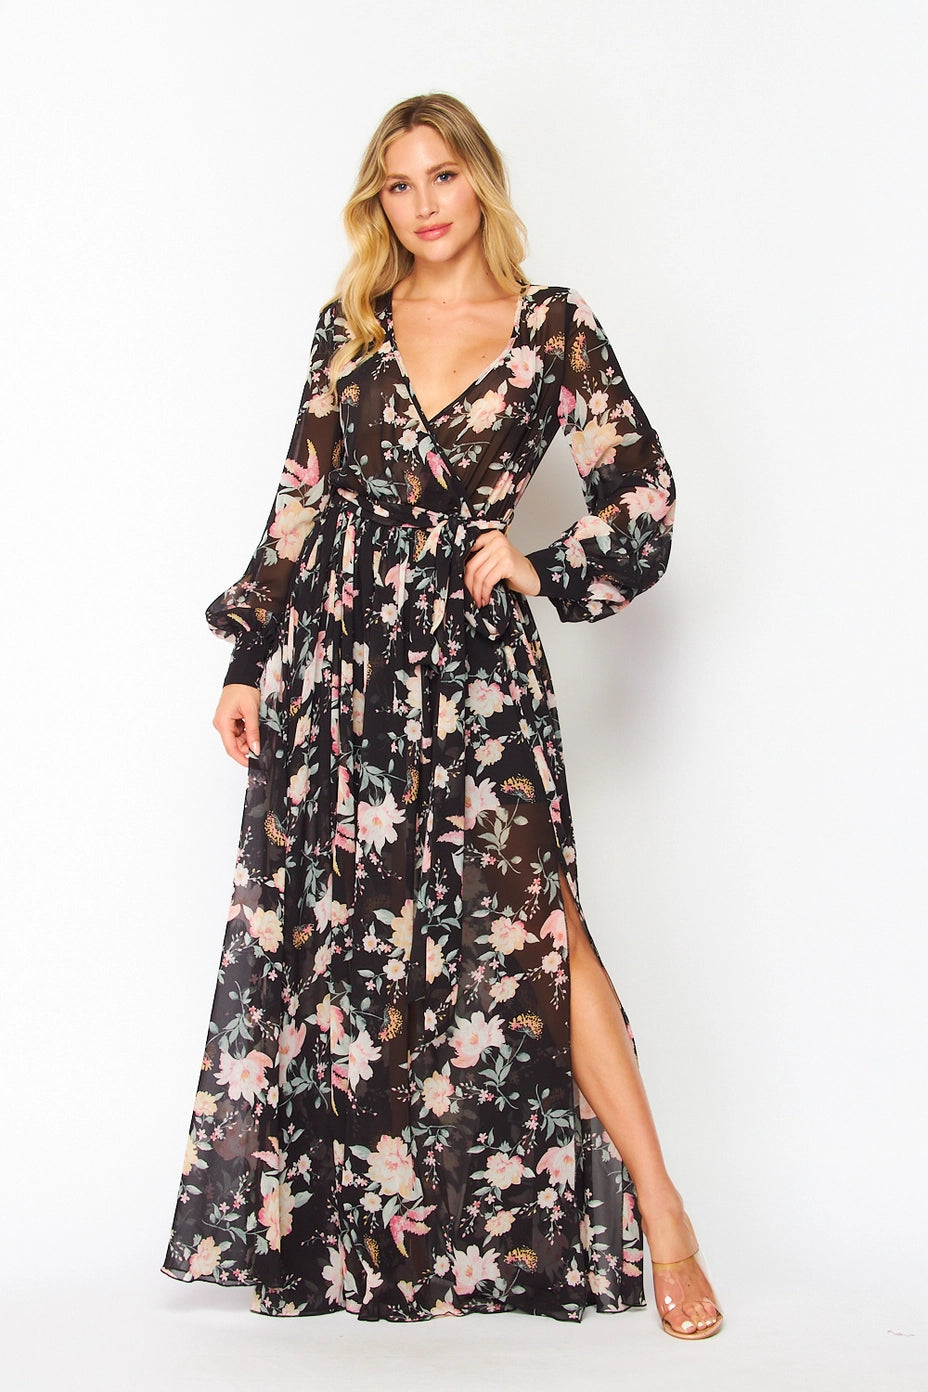 BLACK FLORAL MAXI DRESS – The Spruced Goose Boutique & Gifts